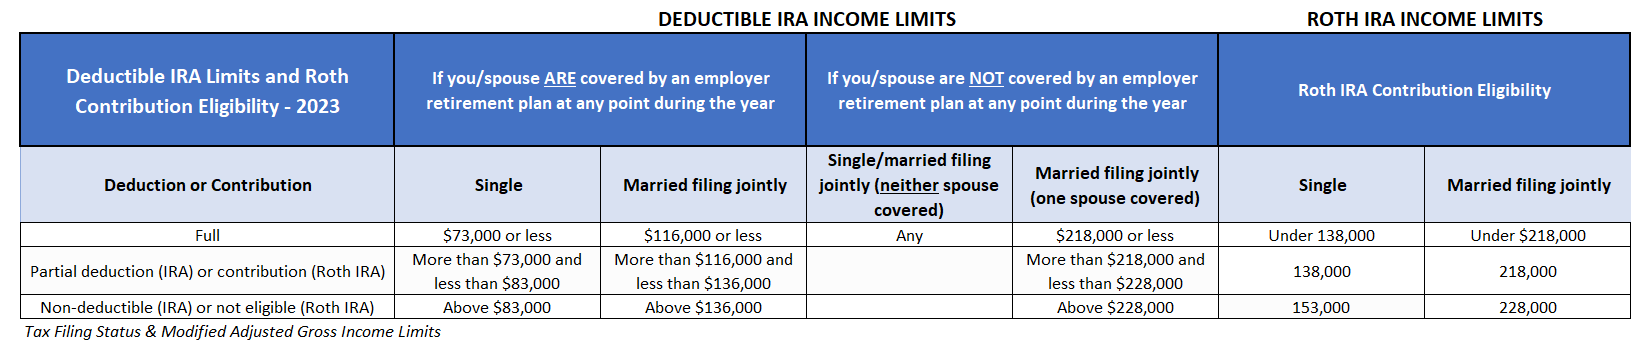 Deductible IRA Limits and Roth Income Limits - 2023